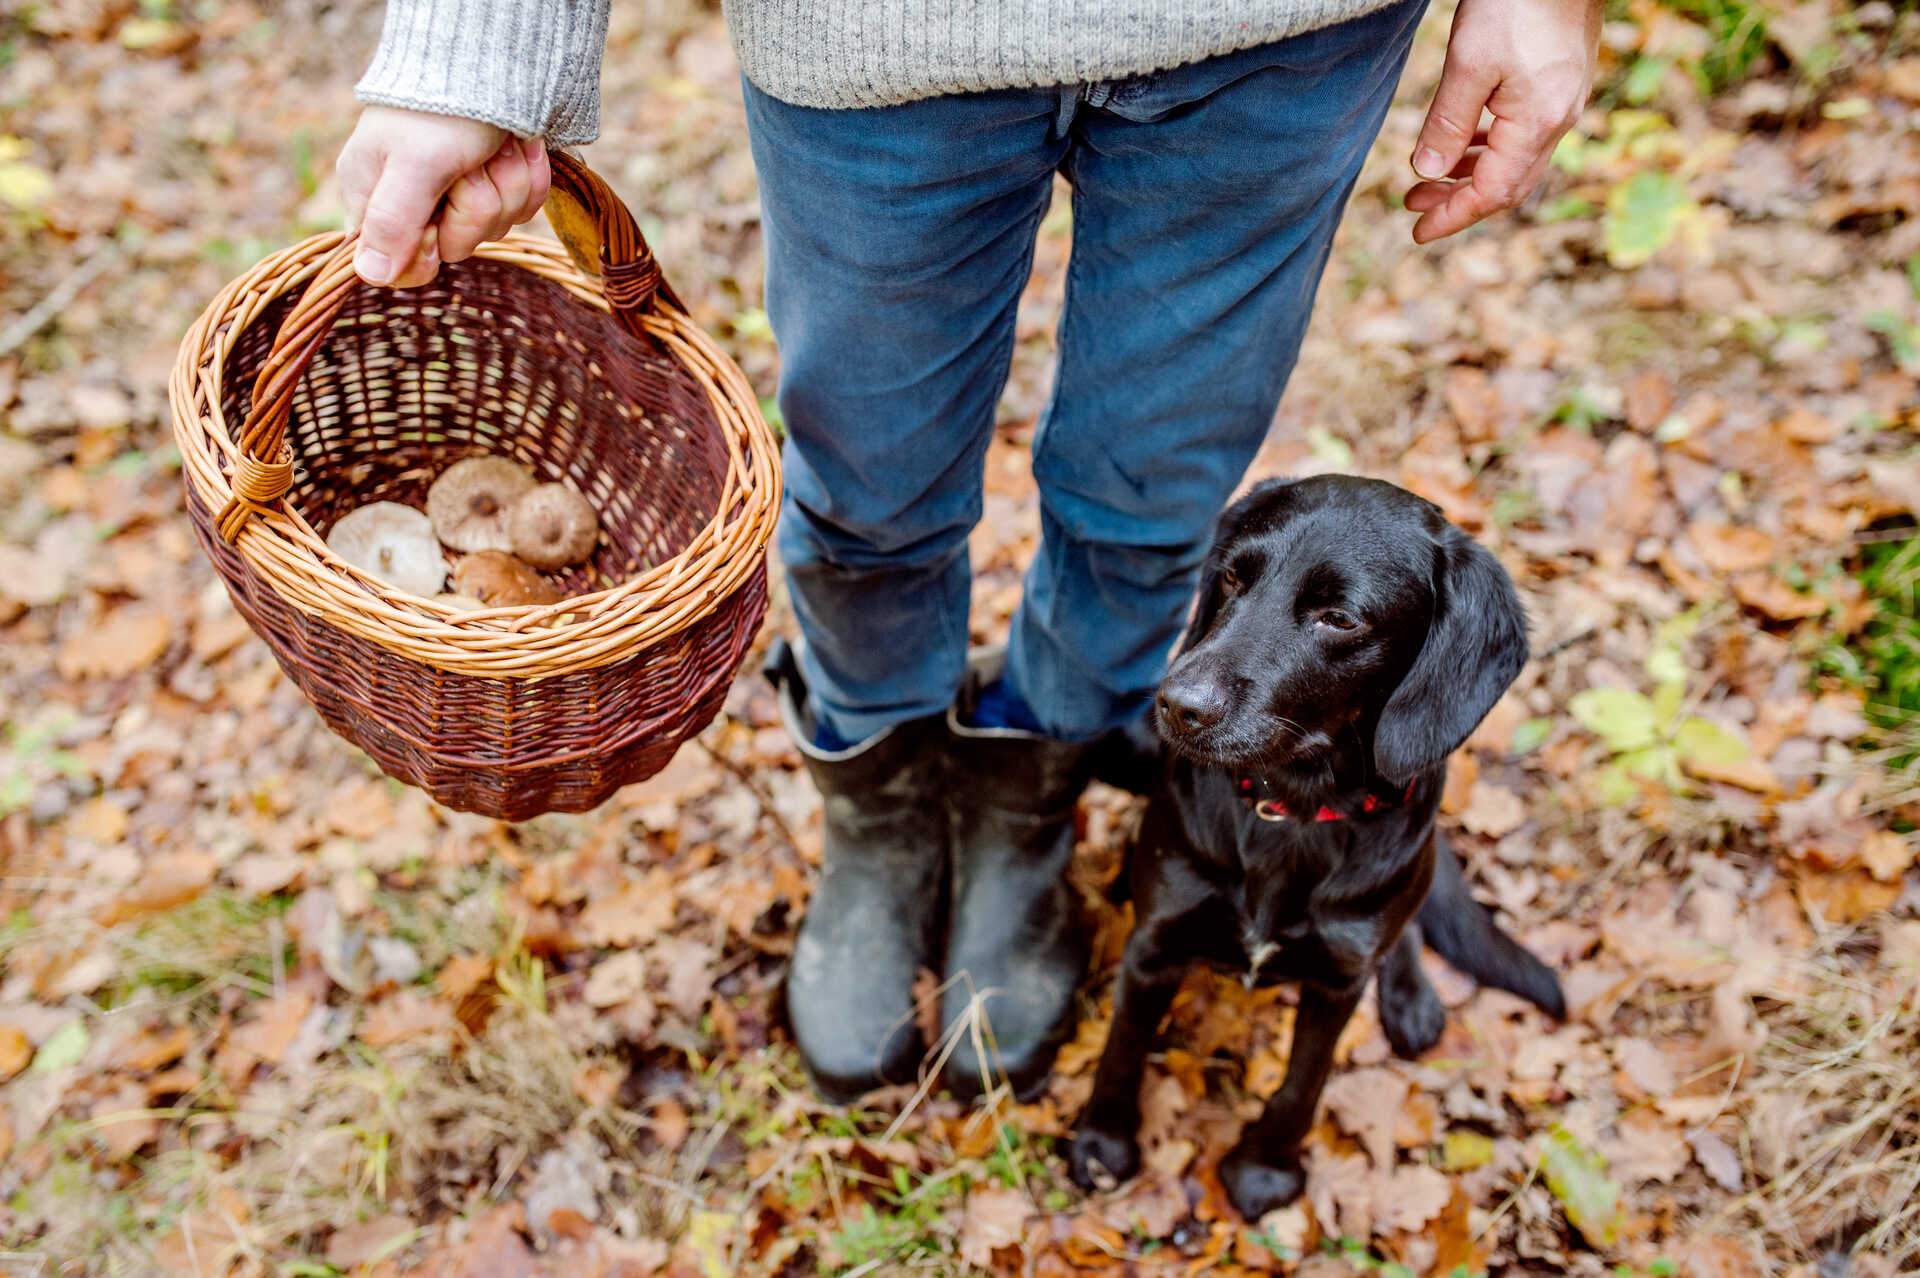 A man standing with a basket of mushrooms next to a dog